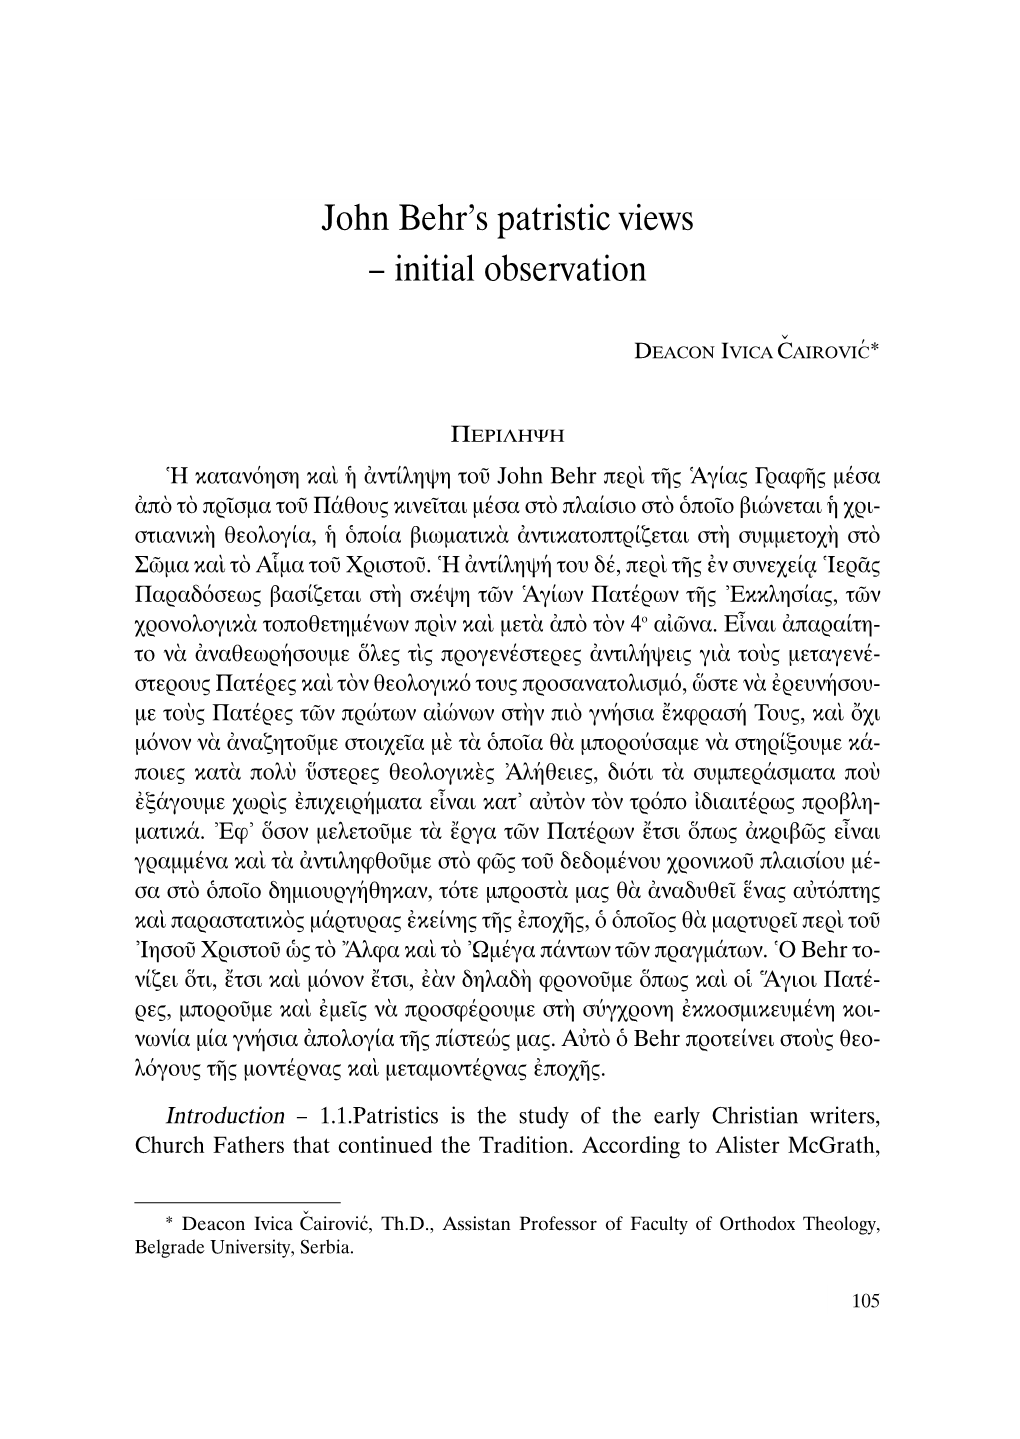 John Behr's Patristic Views – Initial Observation